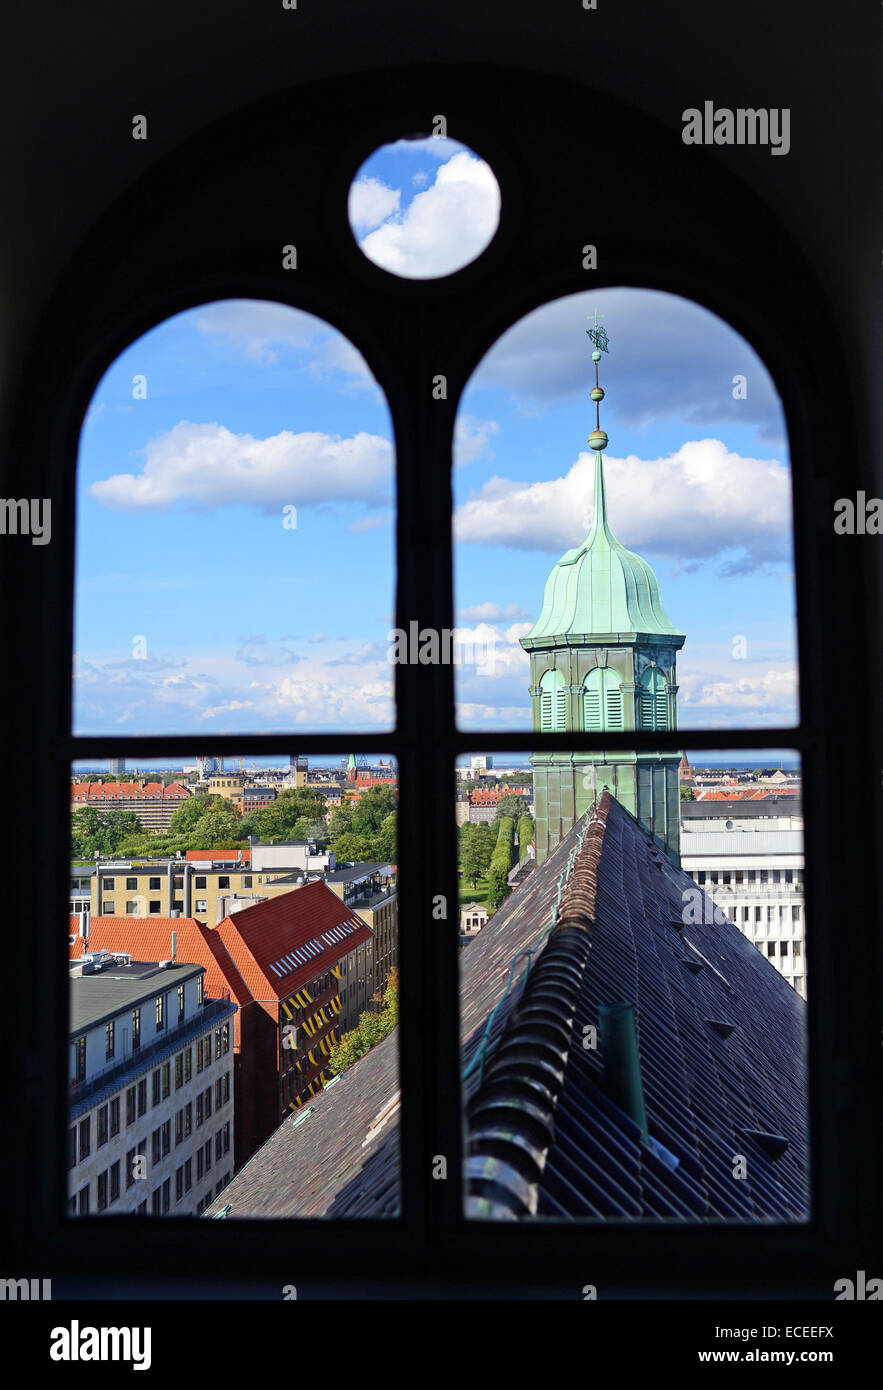 Rundetaarn, or the round tower, 17th century tower and observatory, the oldest functioning observatory in Europe, Copenhagen, De Stock Photo